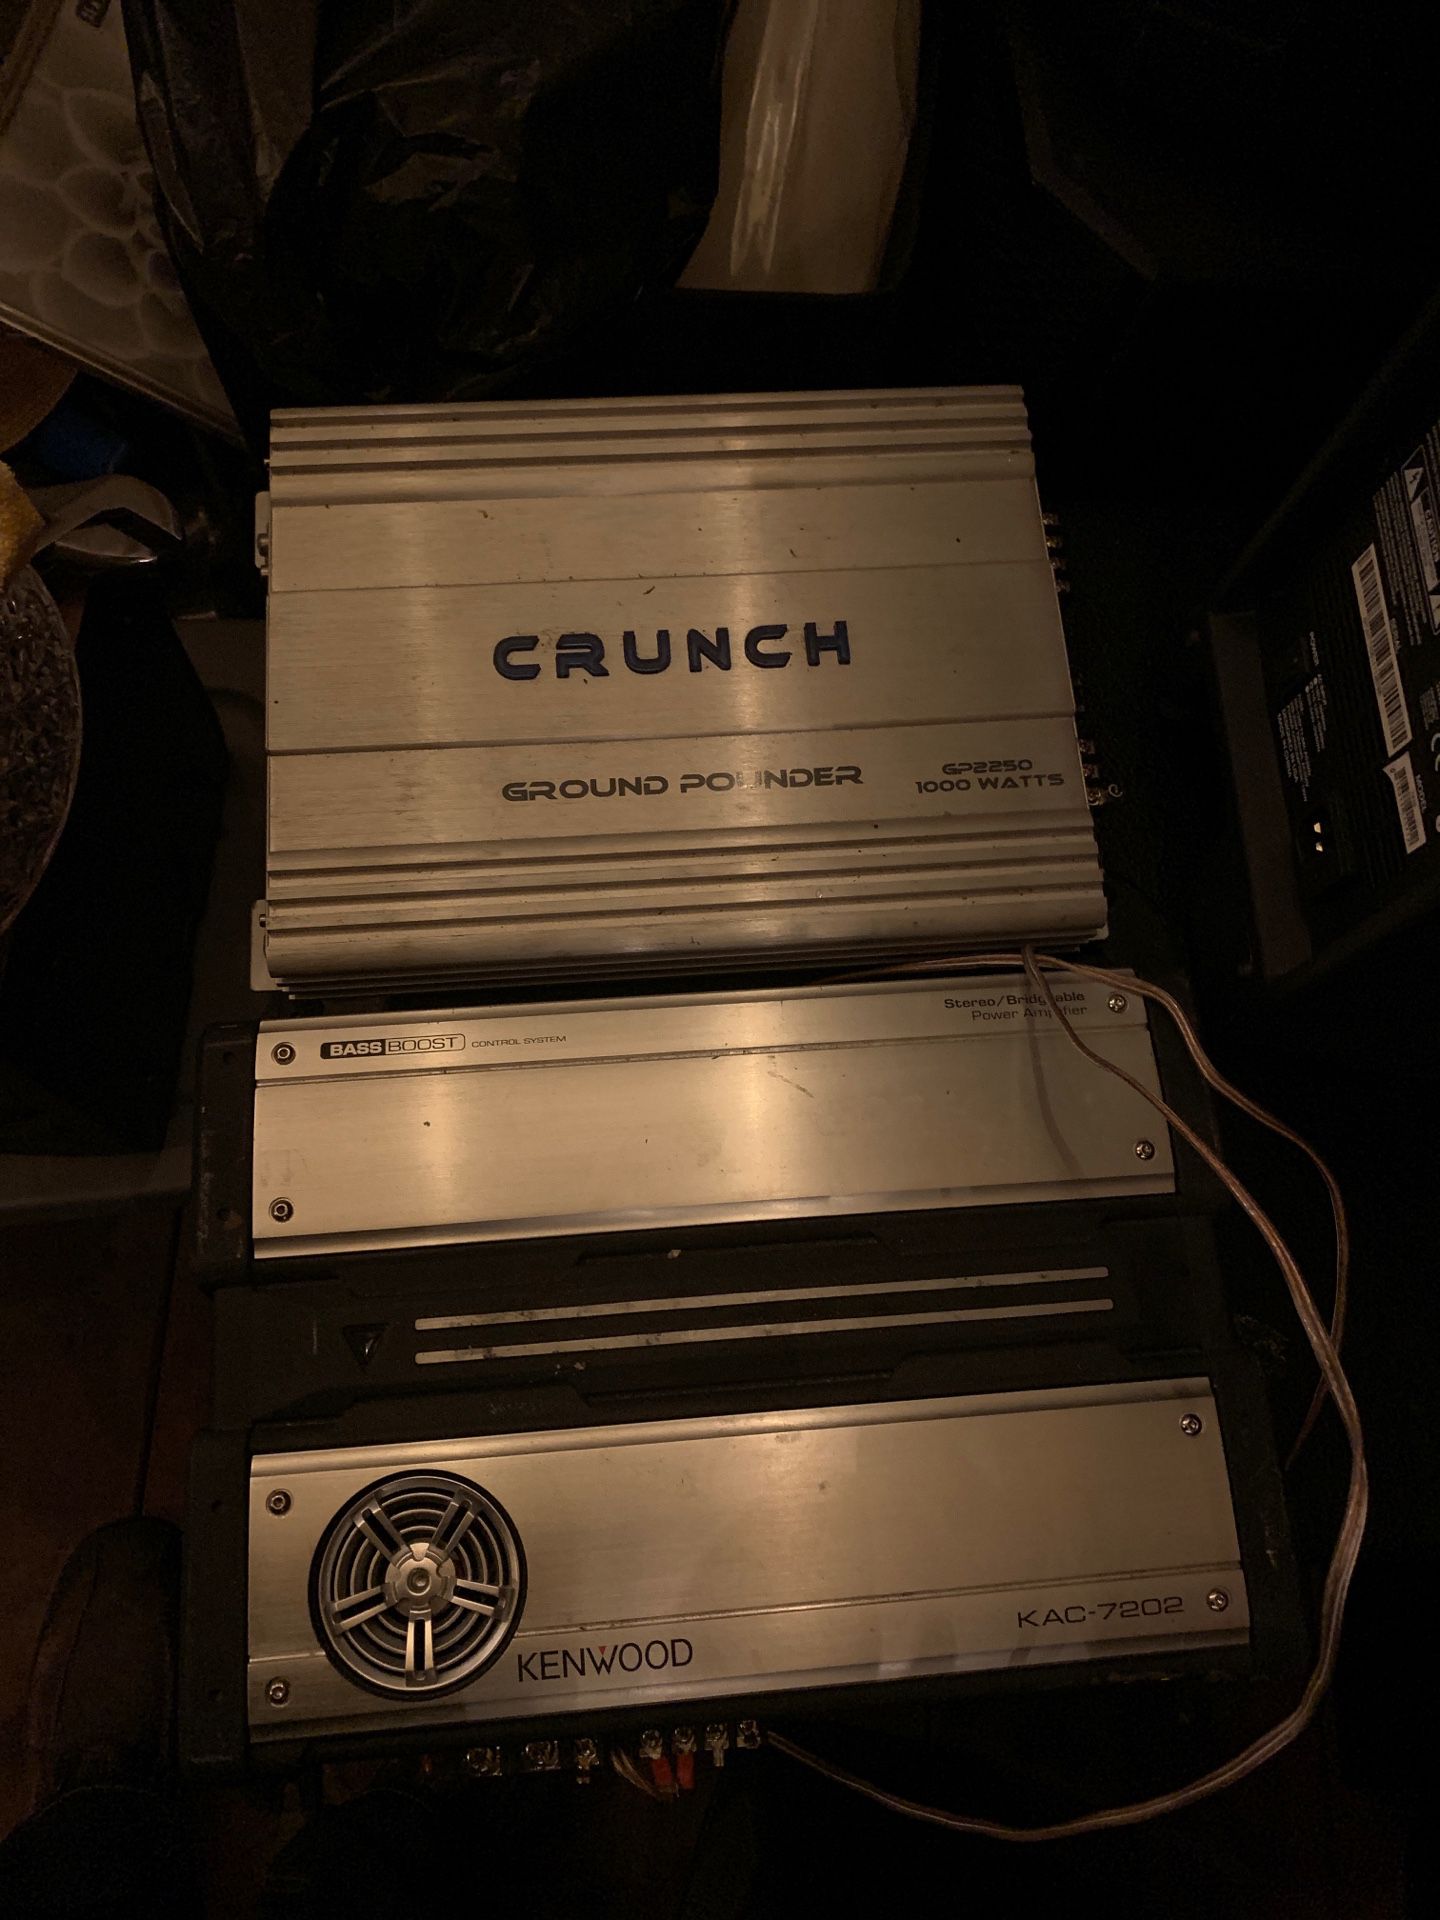 Crunch and kenwood amplifier